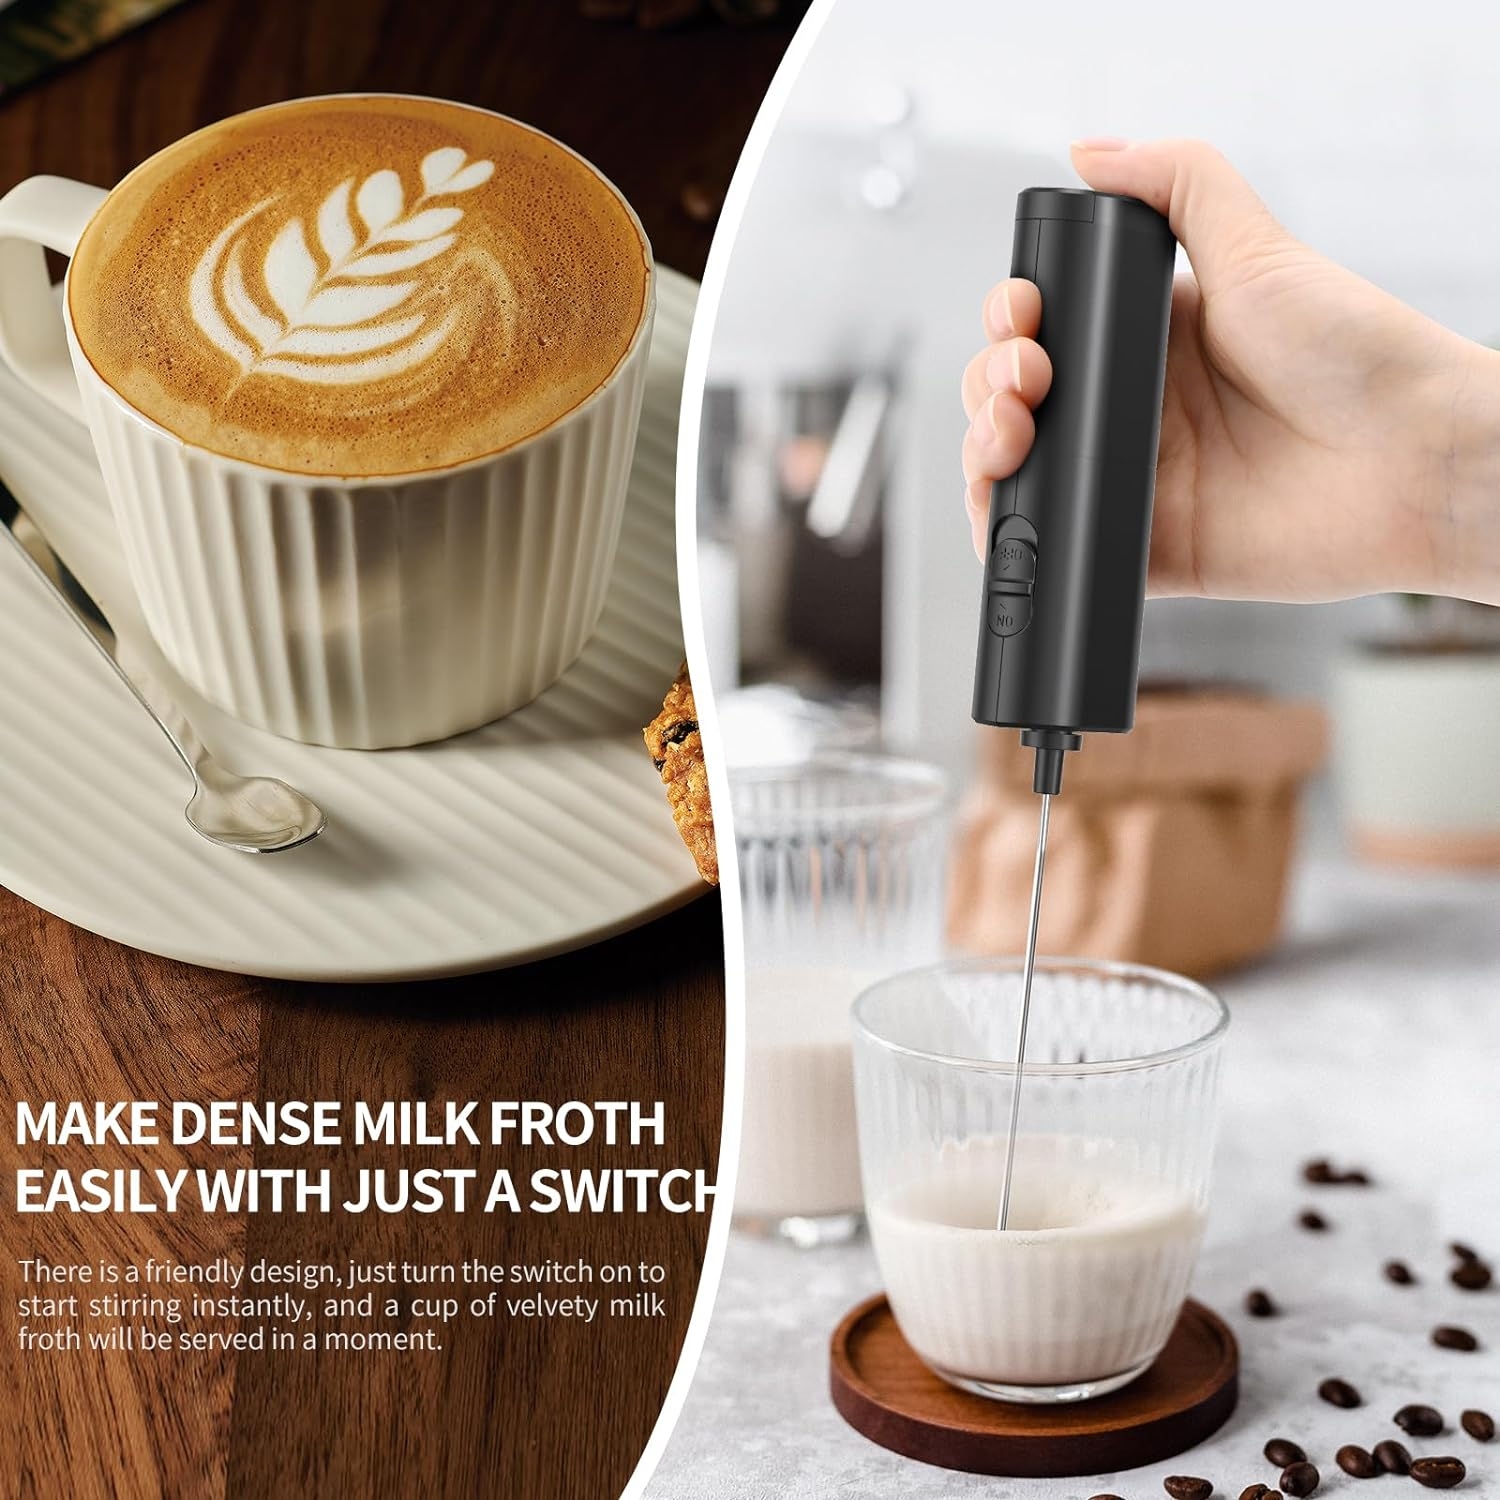  Milk Frother Electric Mixer Coffee - Battery Operated Whisk  Handheld Drink Stirrer Mixing Wand - Mini Coffee Foam Blender Hand Held for  Matcha, Latte, Cappuccino, Frappe, Chocolate: Home & Kitchen